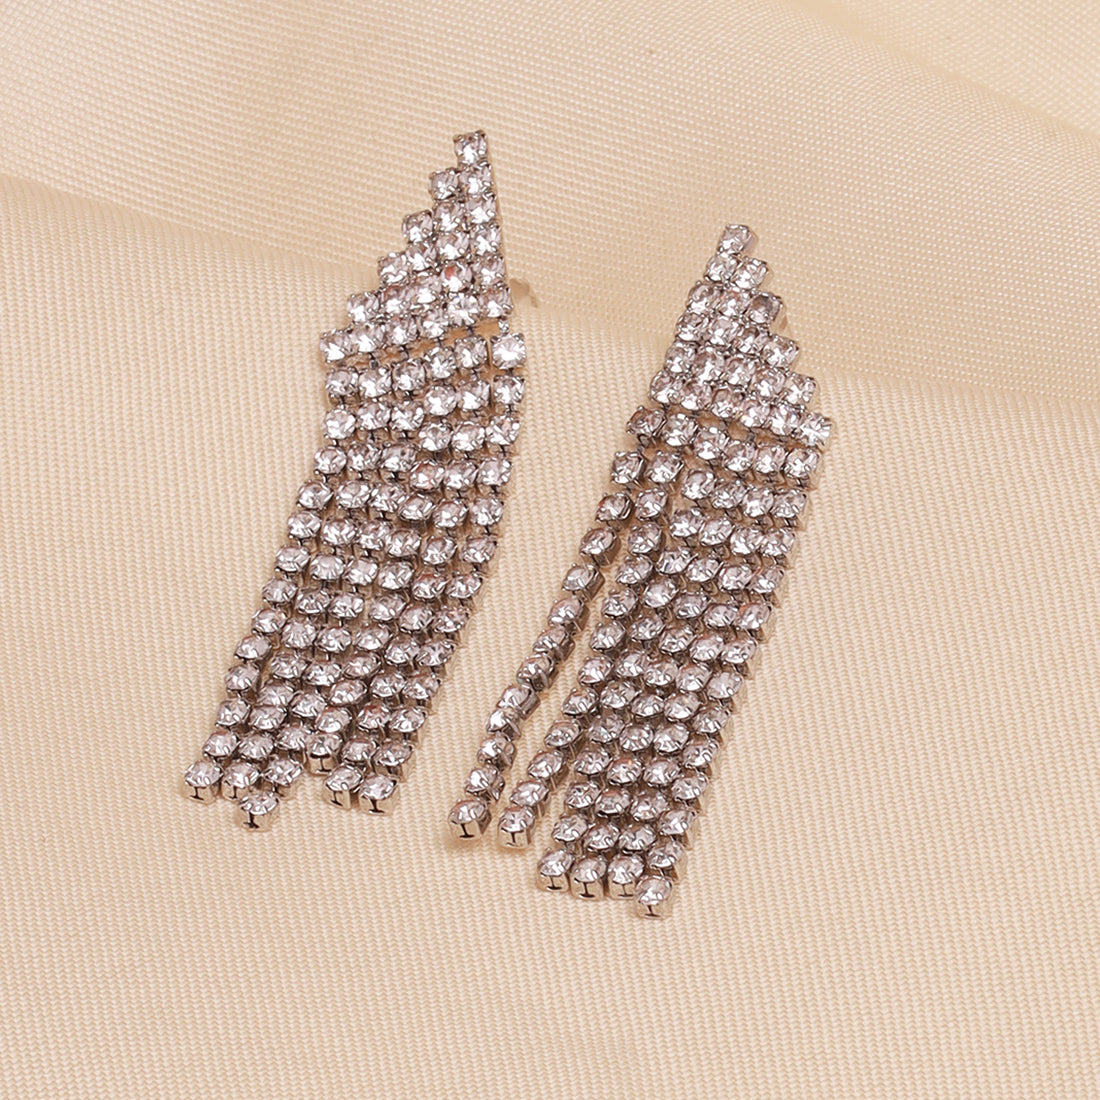 Contemporary White Diamante Crystal Studded Silver -Toned Triangular Tassel Drop Earrings